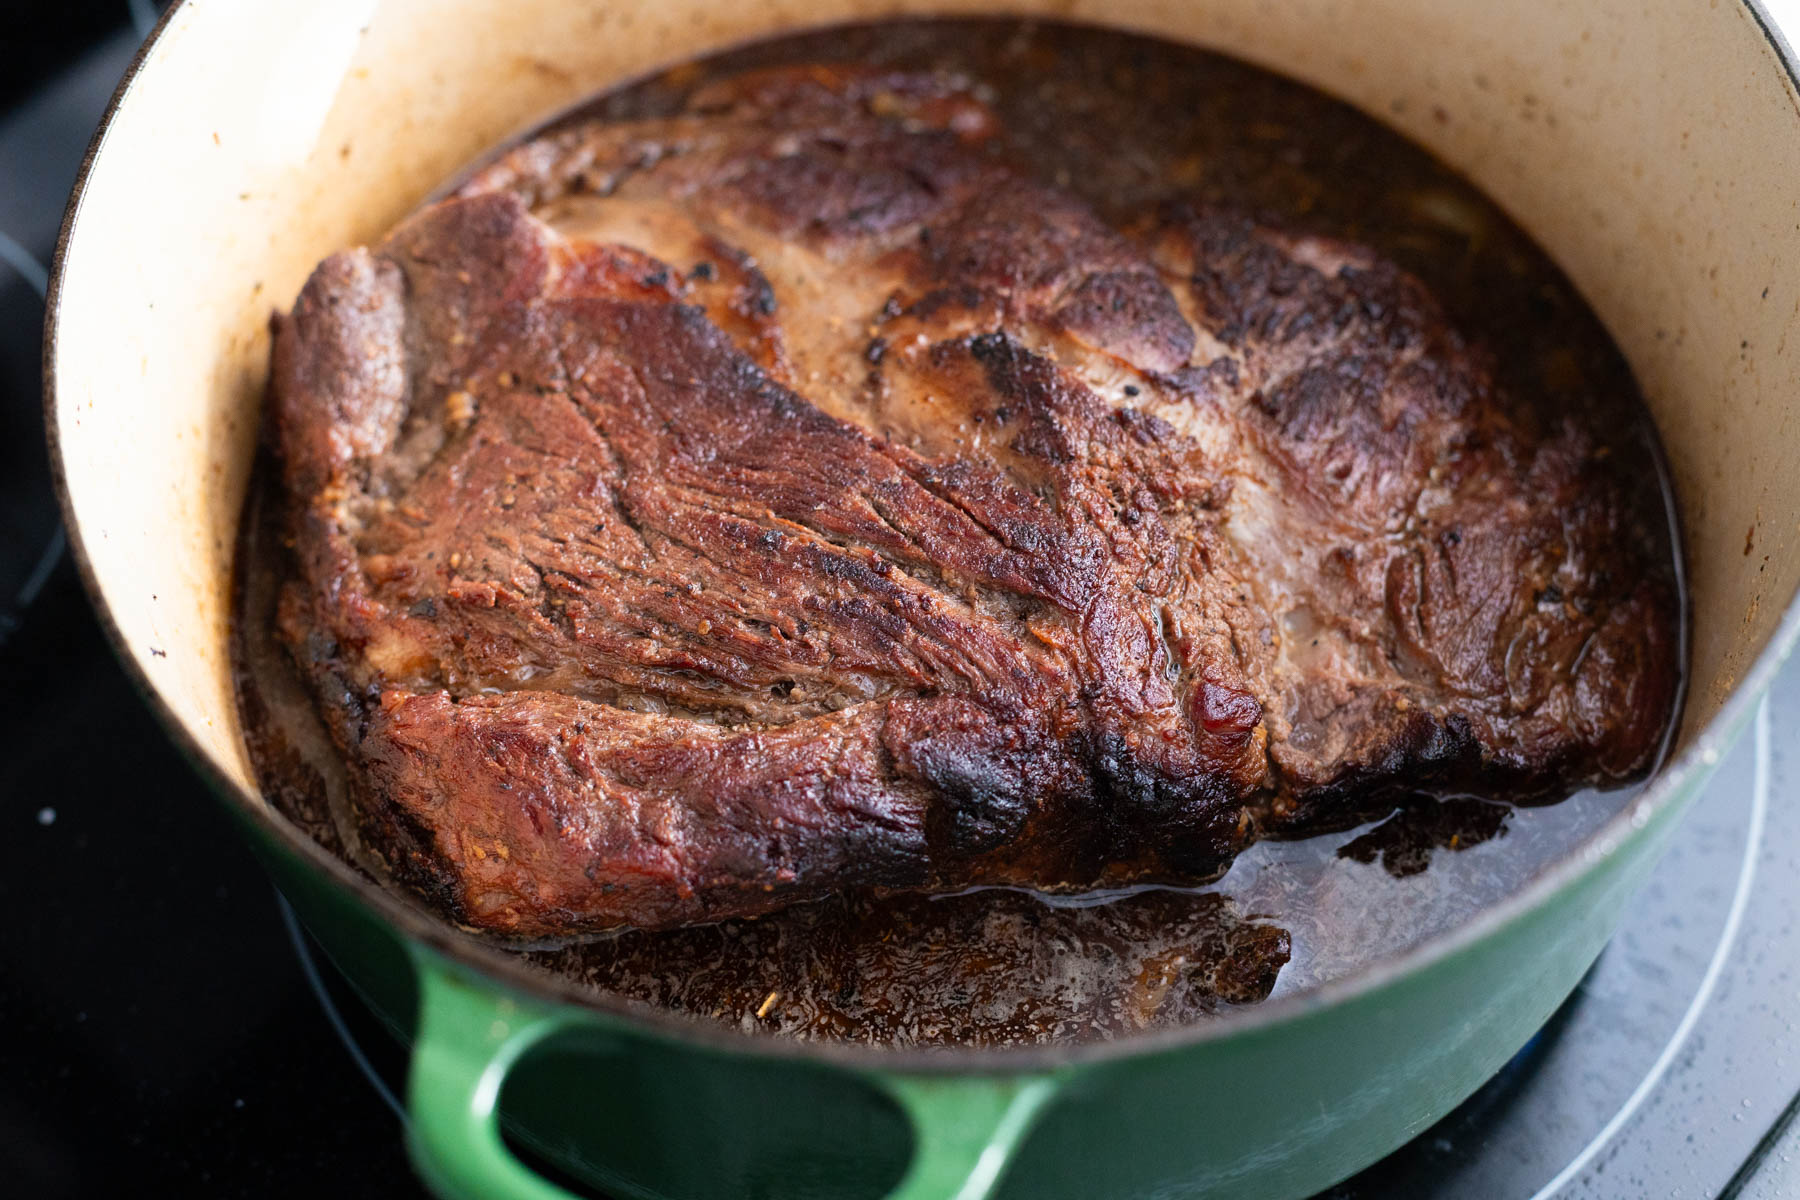 The chuck roast has been seared and is now resting in an inch of beef stock about to be slowcooked in the oven.